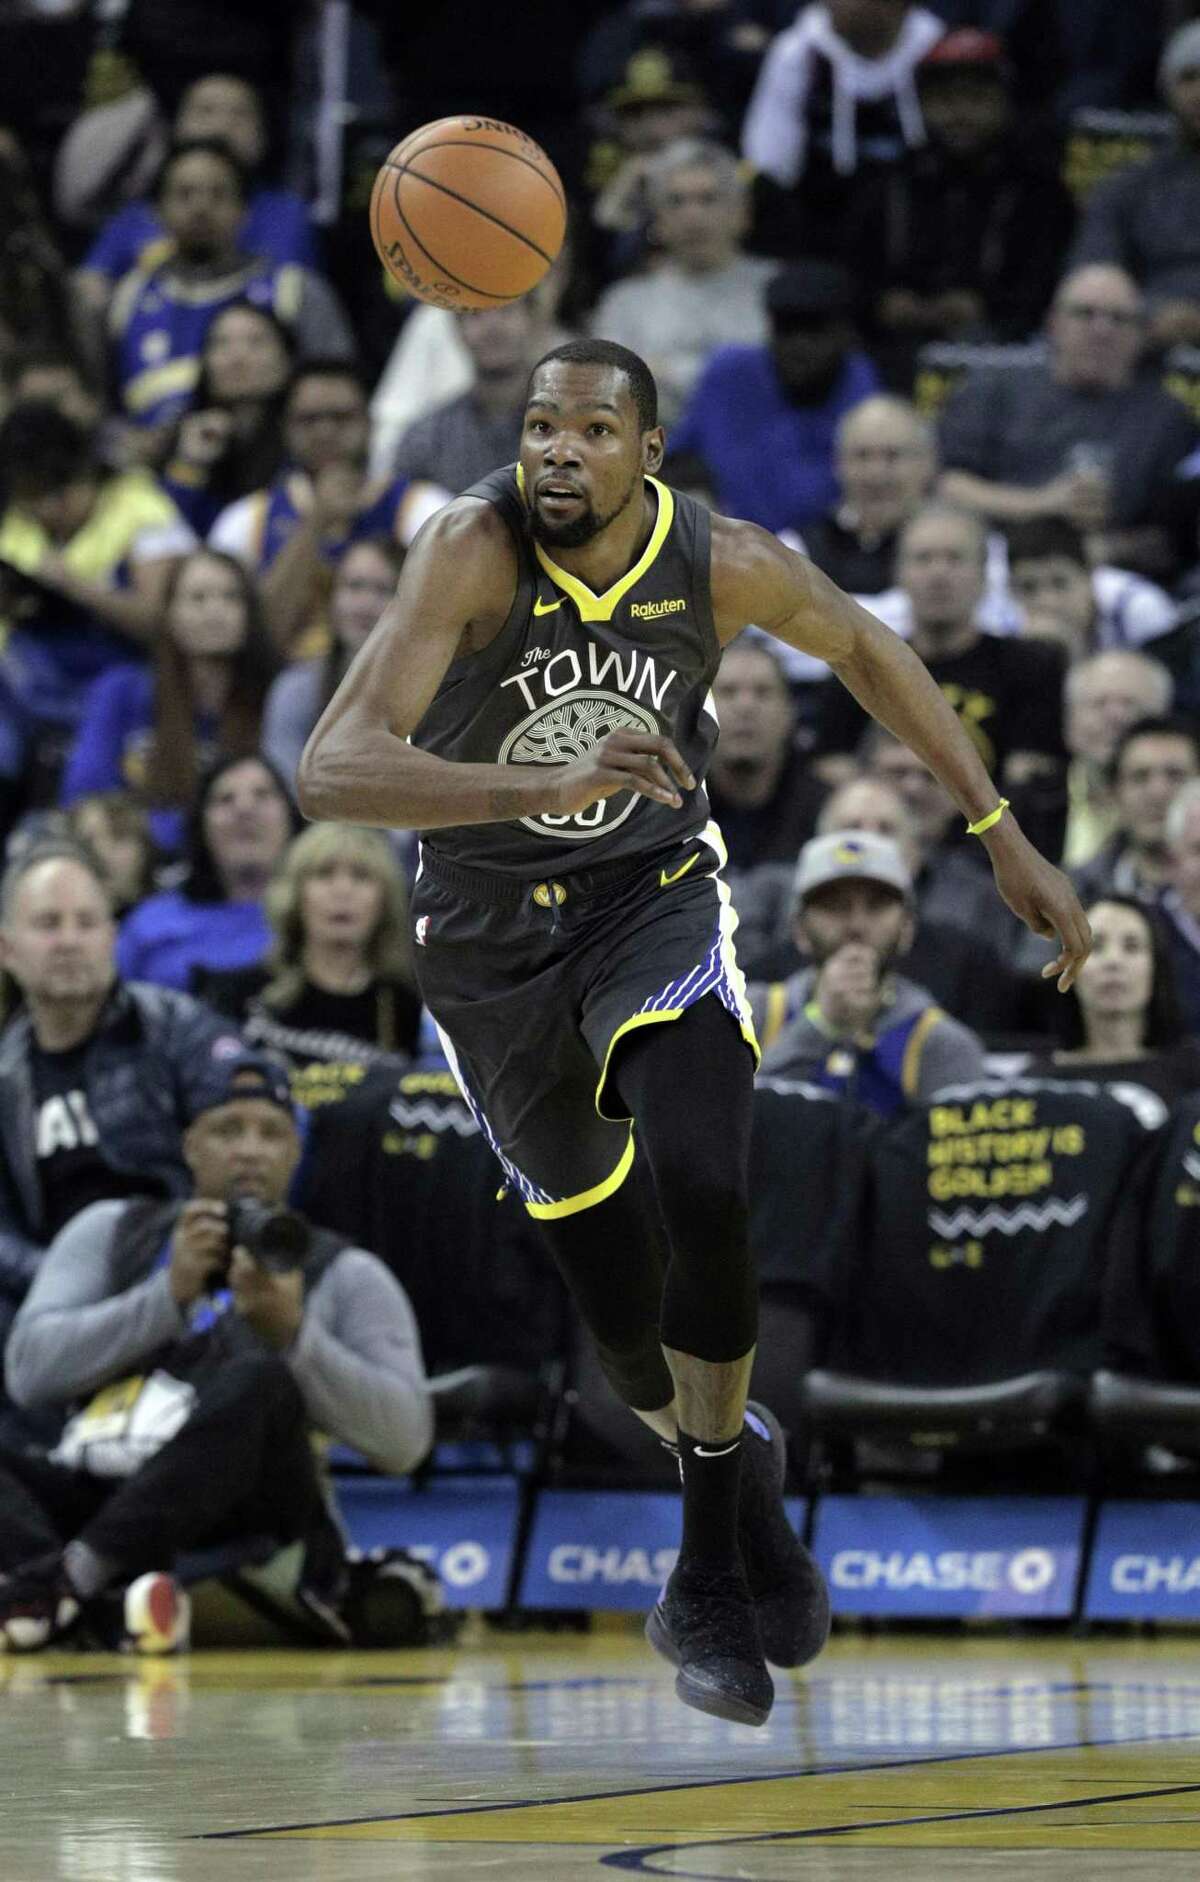 Kevin Durant (35) chases down a rebound in the first half as the Golden State Warriors played the Miami Heat at Oracle Arena in Oakland, Calif., on Sunday, February 10, 2019.